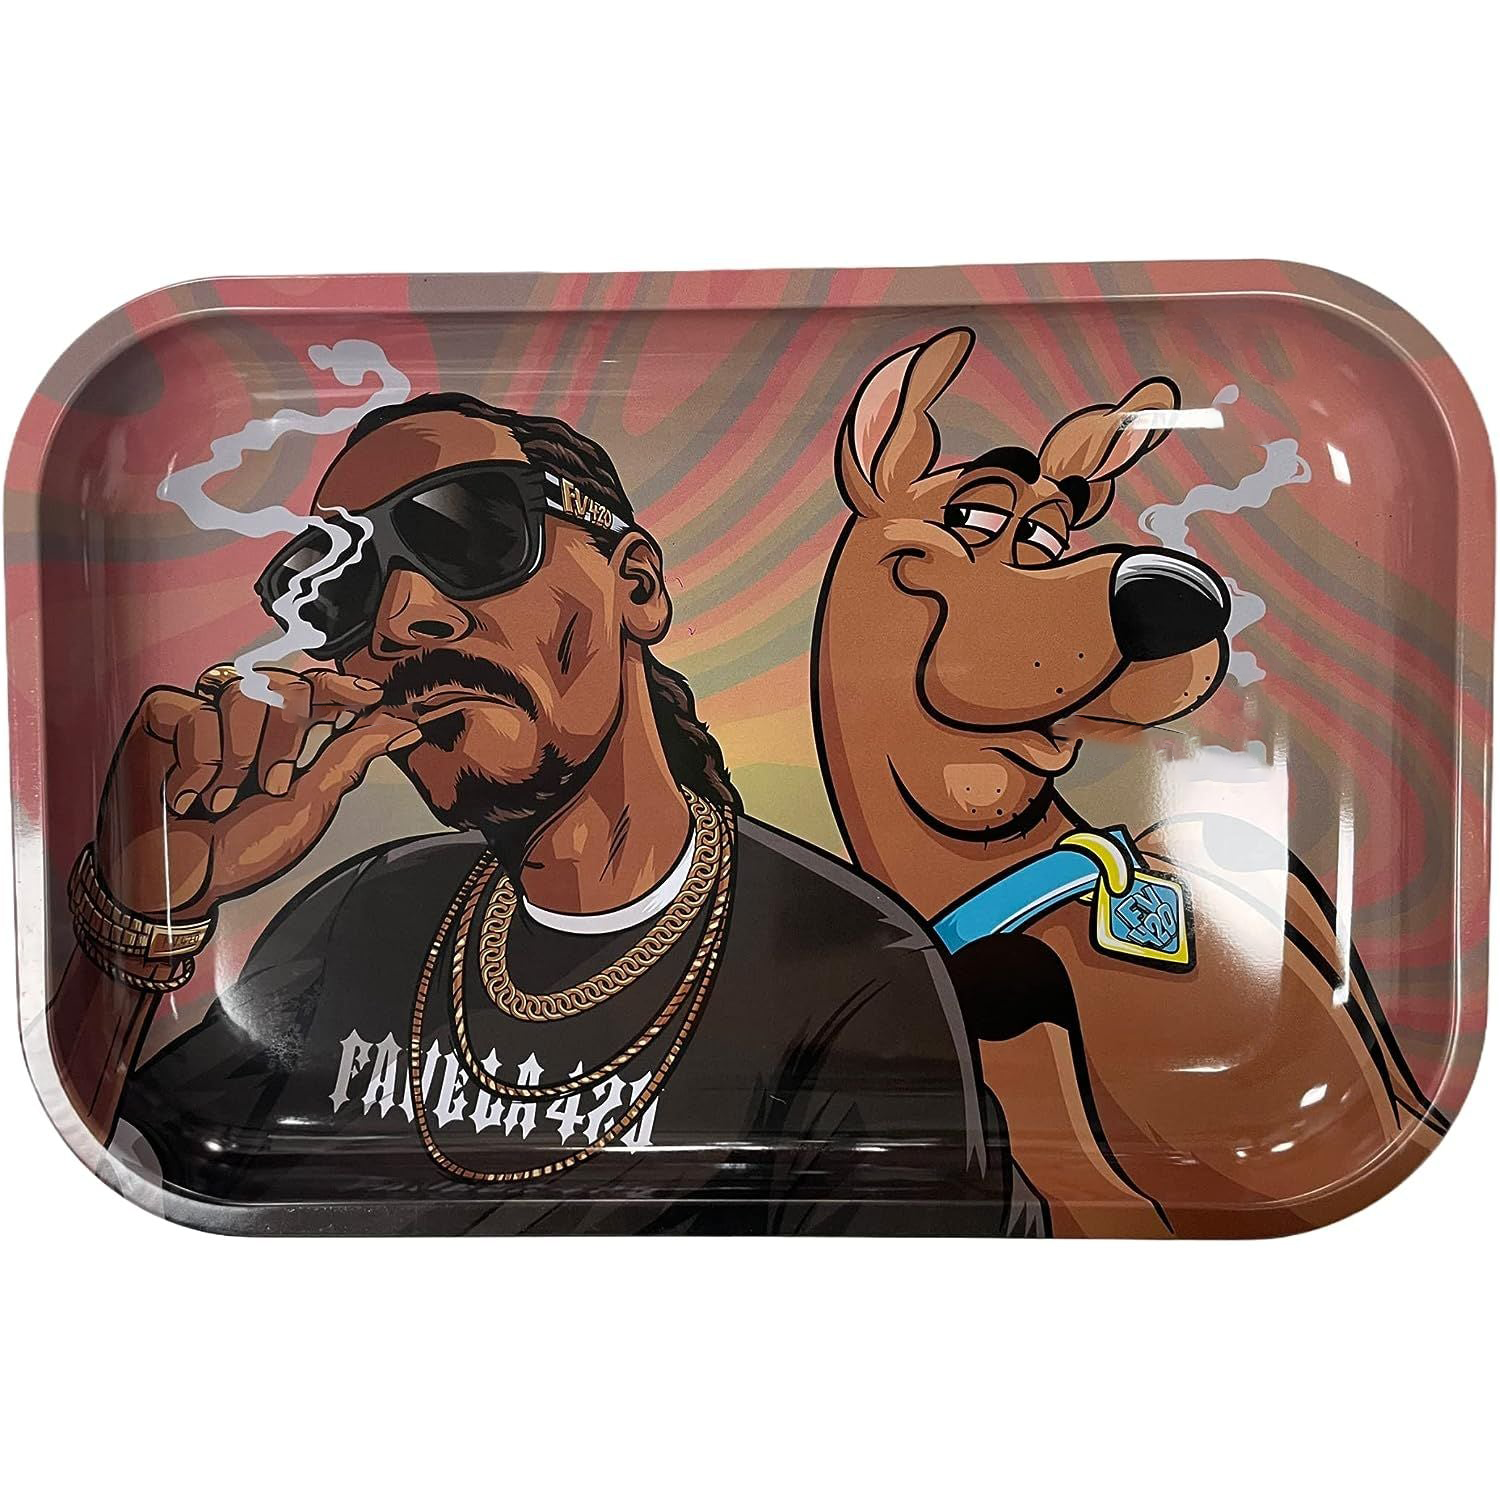 pop smoke the woo Hand made metal rolling tray sets with digital artwork  inspired by hip hop — Meech Made It